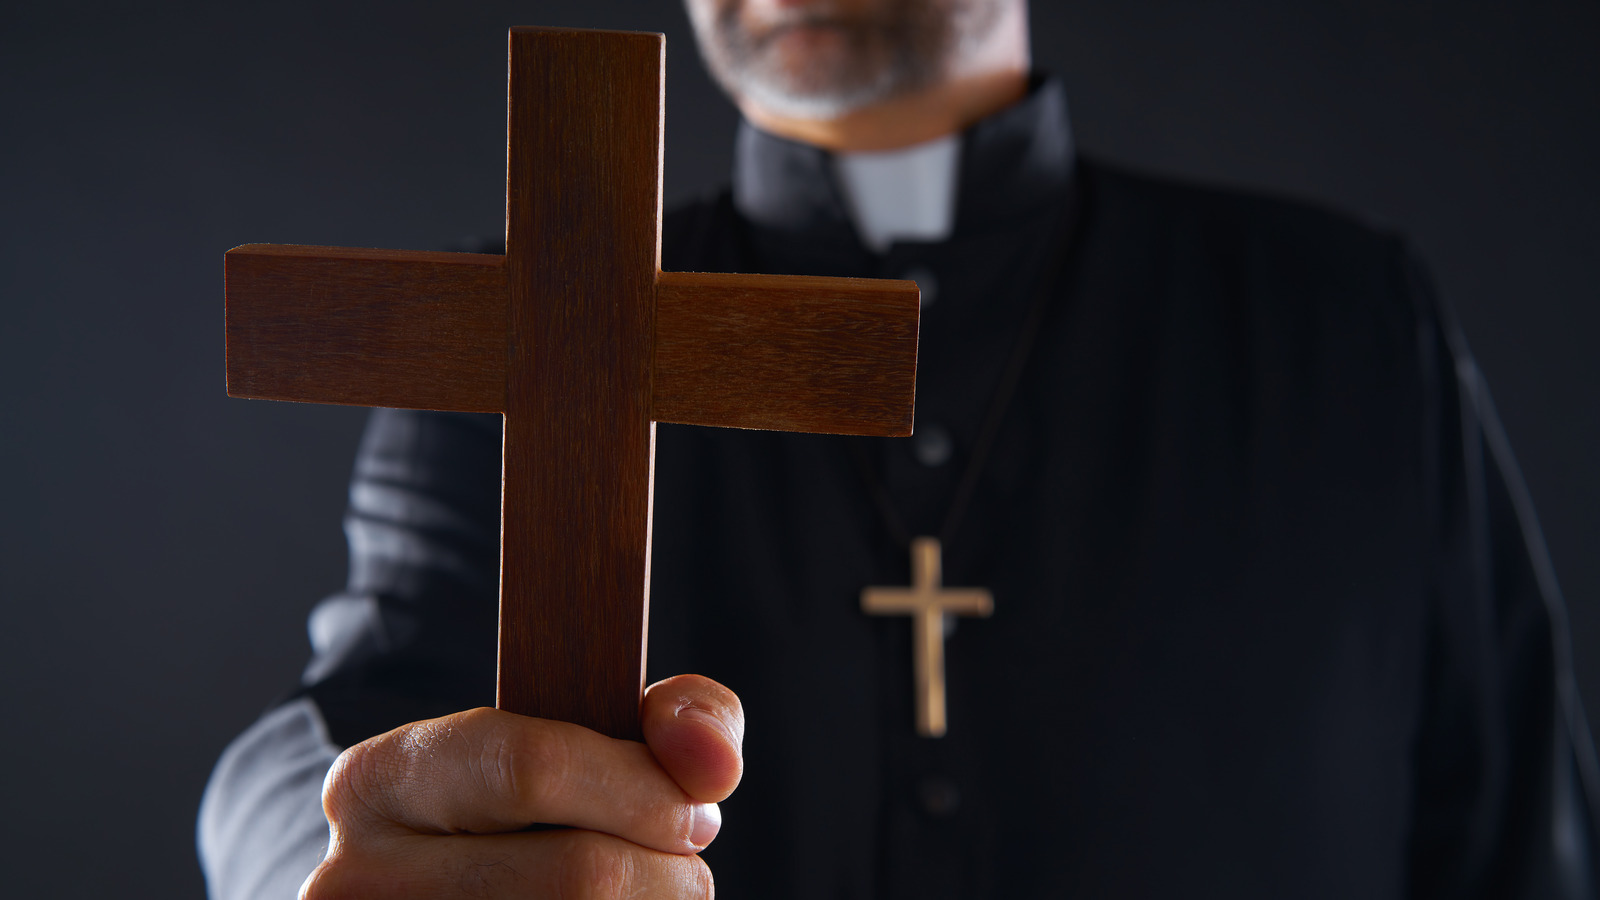 The Dark Truth Behind The Vatican's School For Exorcisms